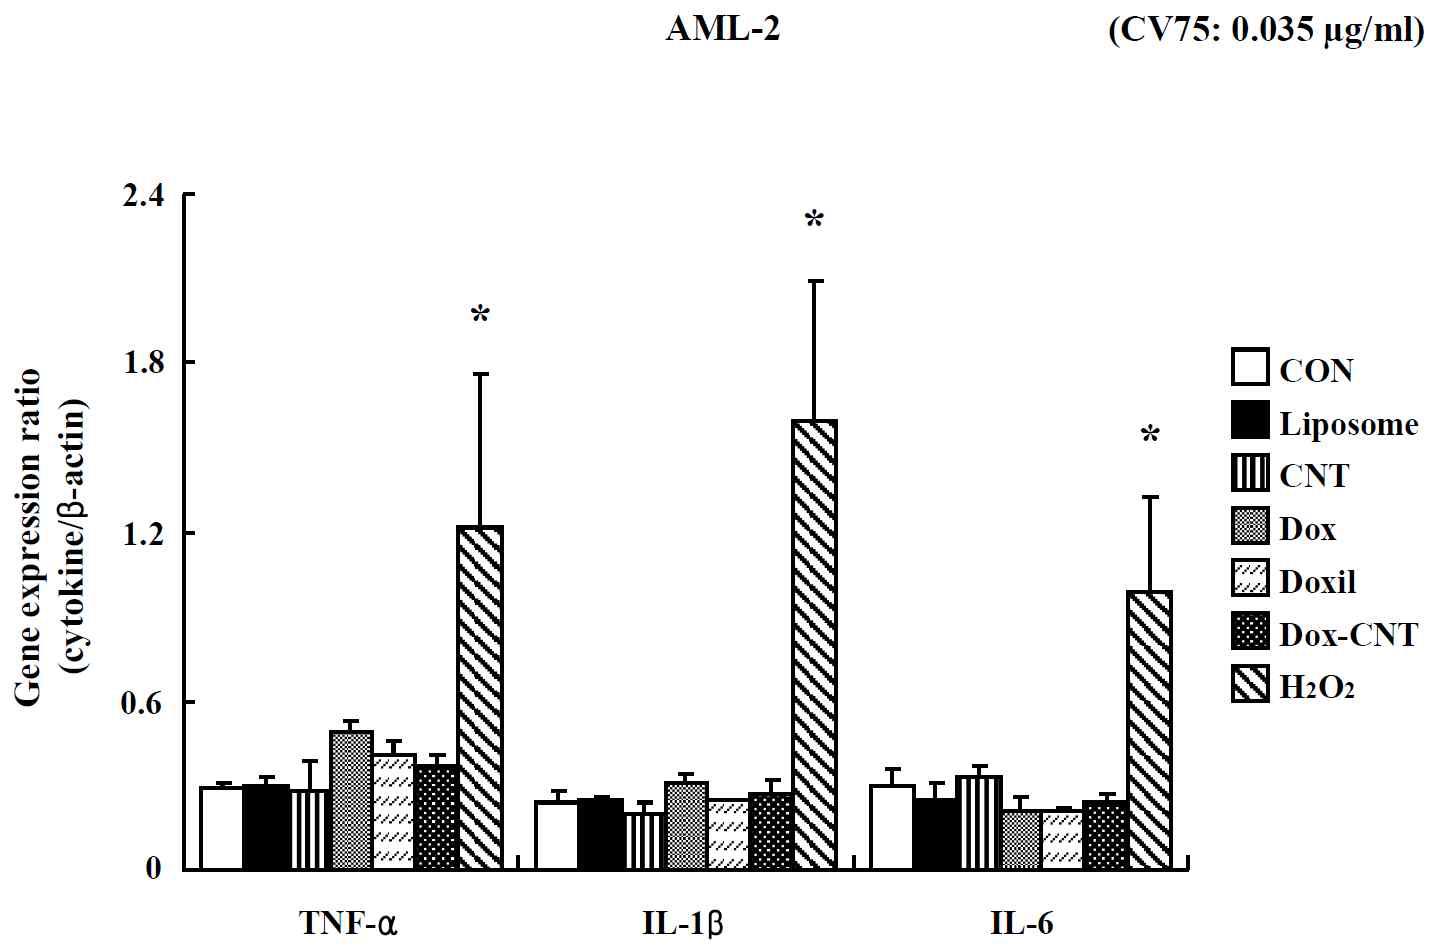 Effects of nano-anticancer drugs on TNF-α, IL-1β, IL-6 gene expression in AML-2 cells. Cells were treated with drugs for 24 hr. Real-time PCR amplification of the housekeeping gene, β-actin, was performed for each sample. Data are shown as means ± SE (n = 3). * p<0.05, significantly different from the control.